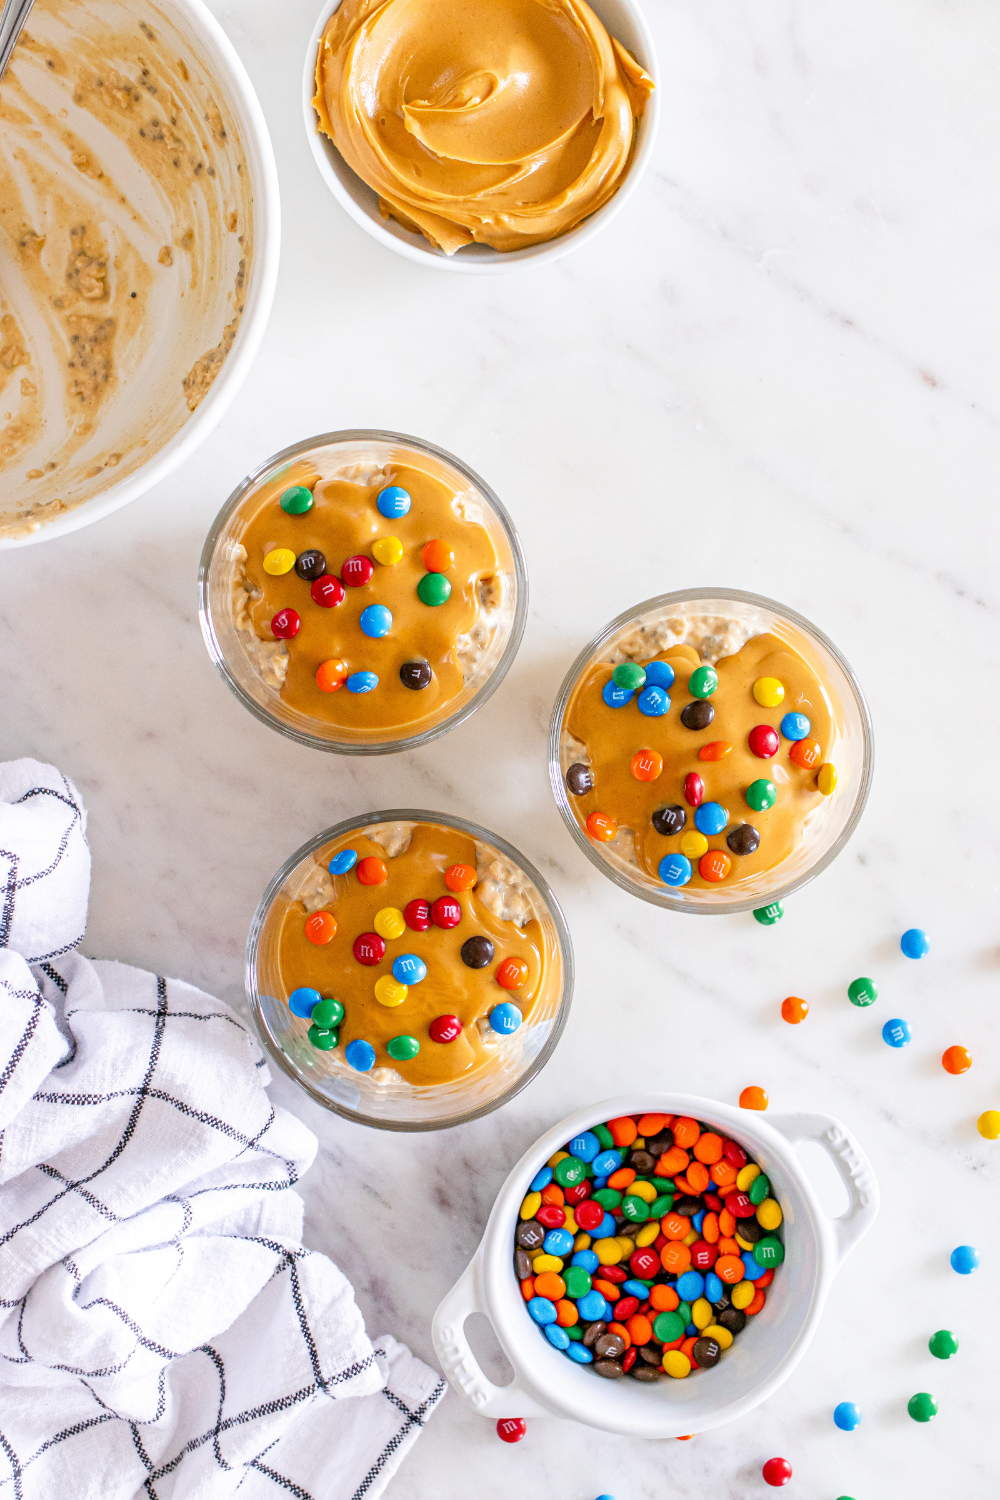 Limited PLR - Monster Cookie Overnight Oats